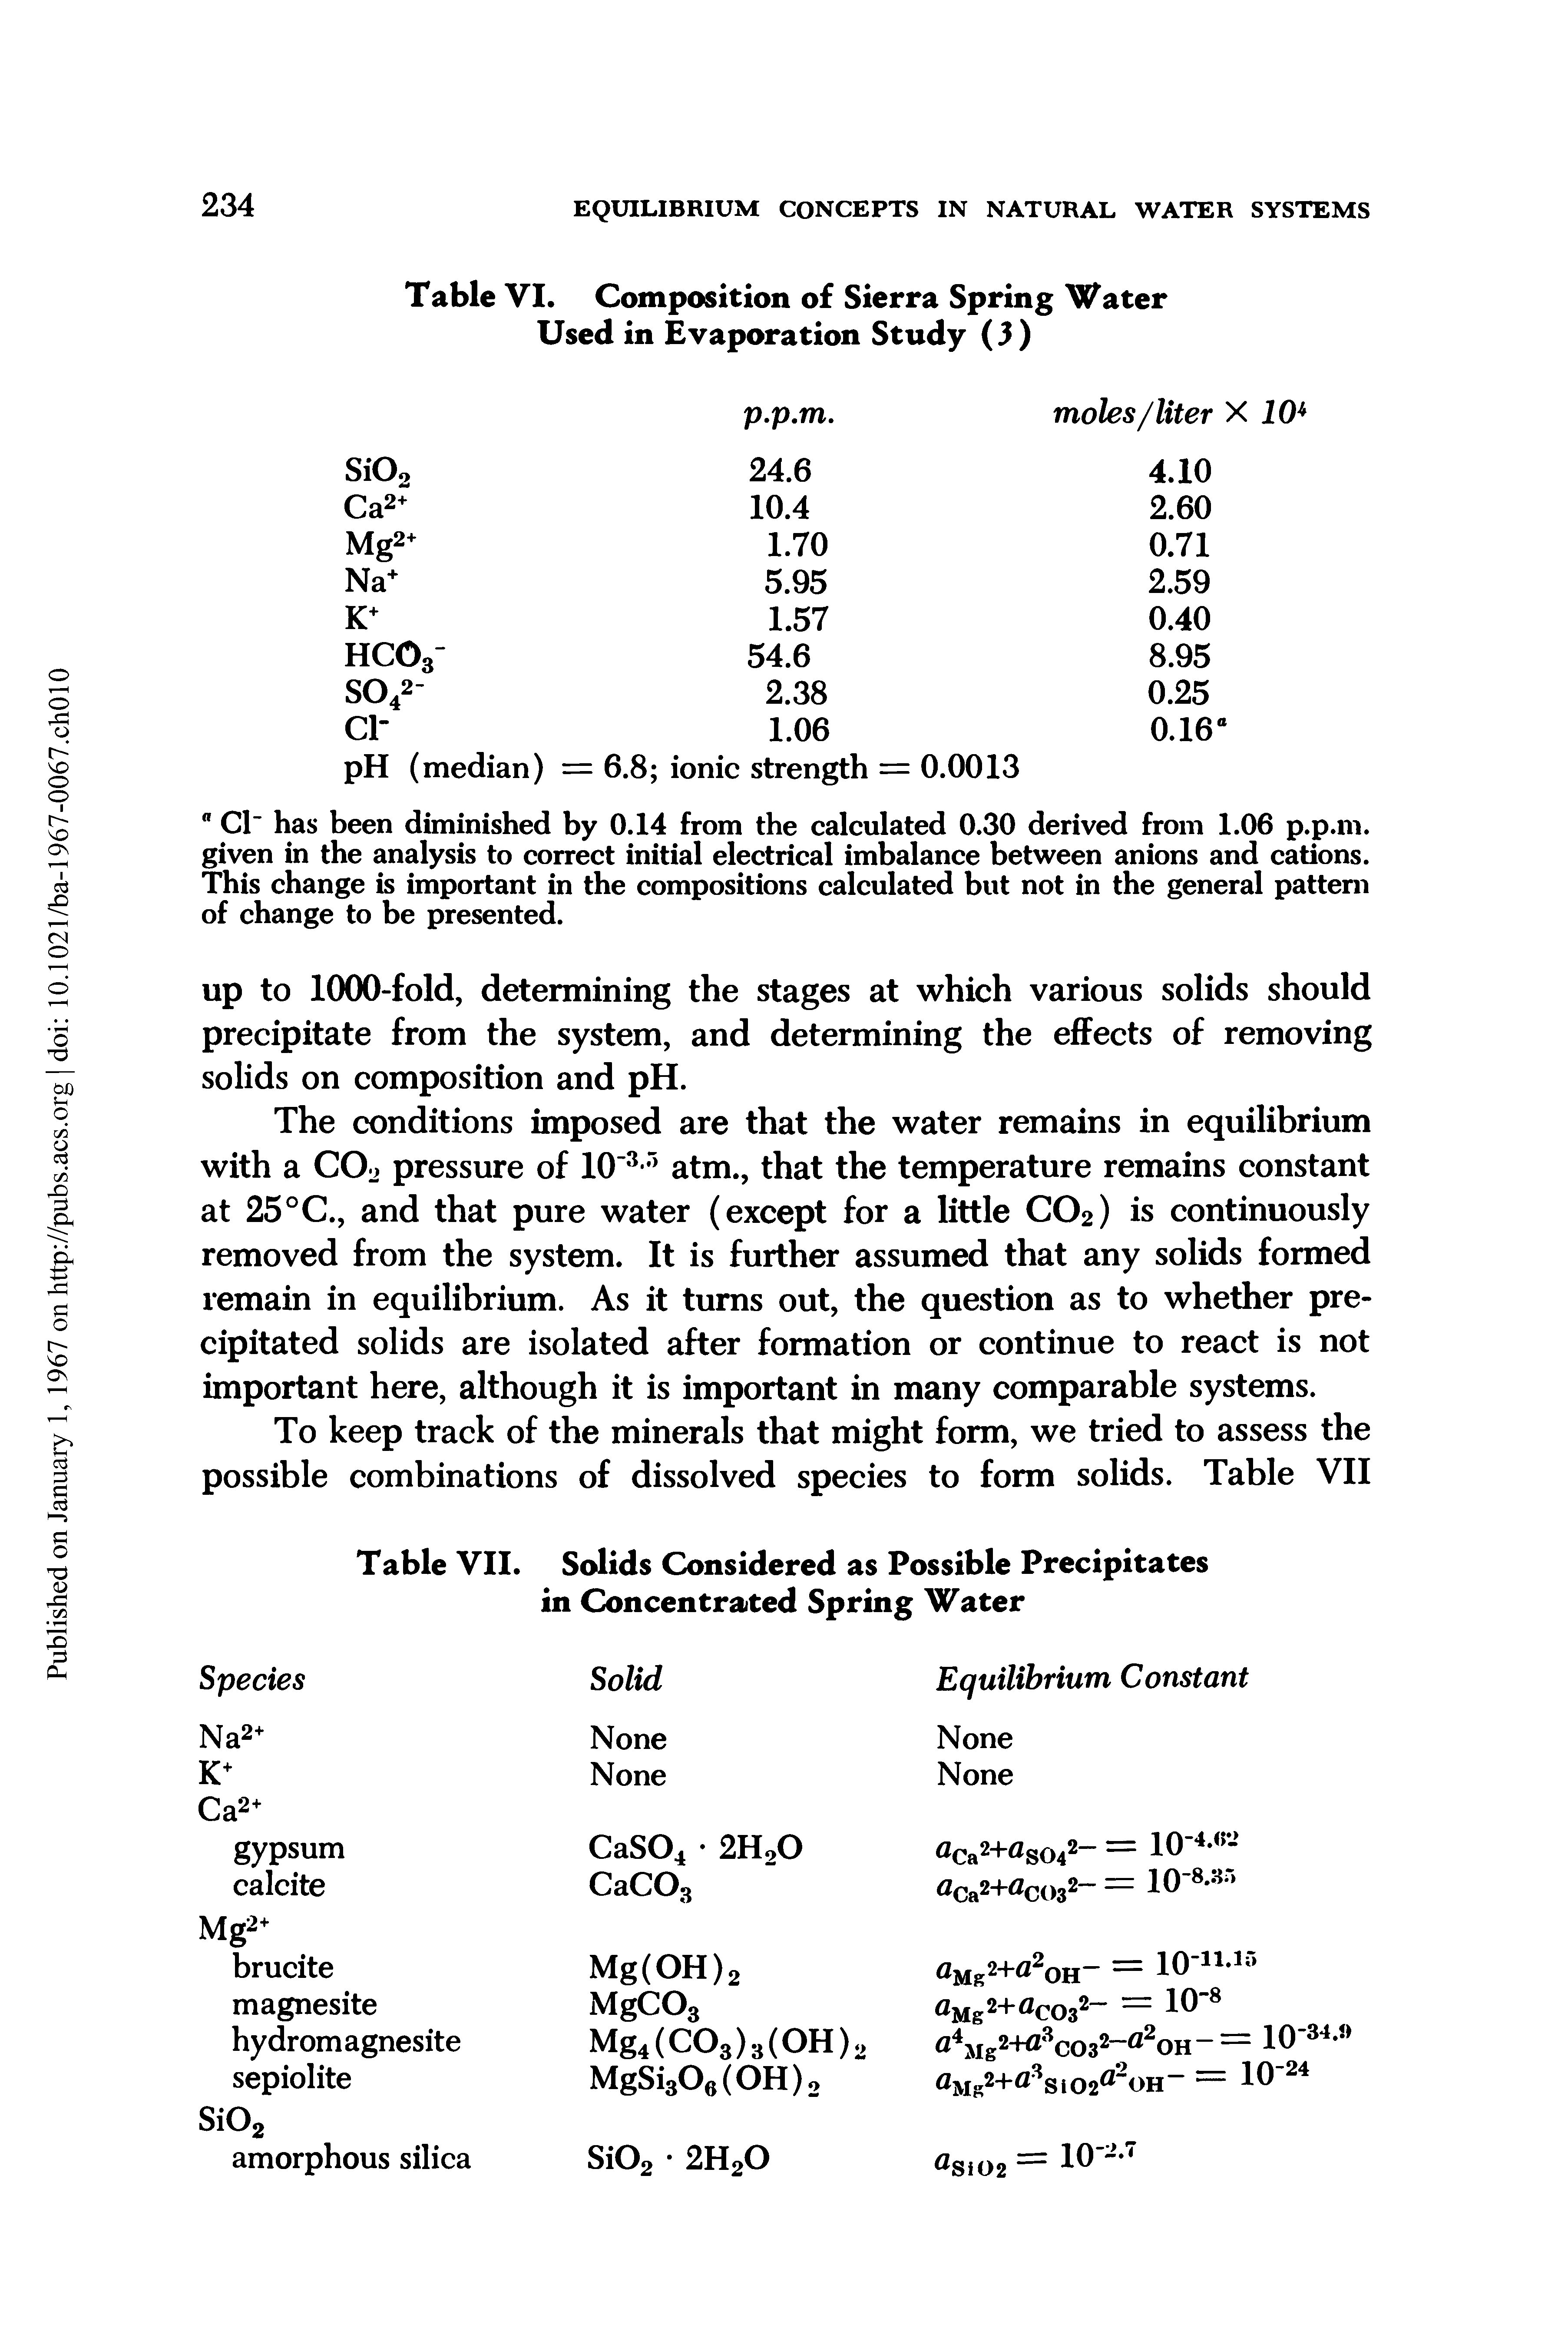 Table VI. Composition of Sierra Spring Water Used in Evaporation Study (3)...